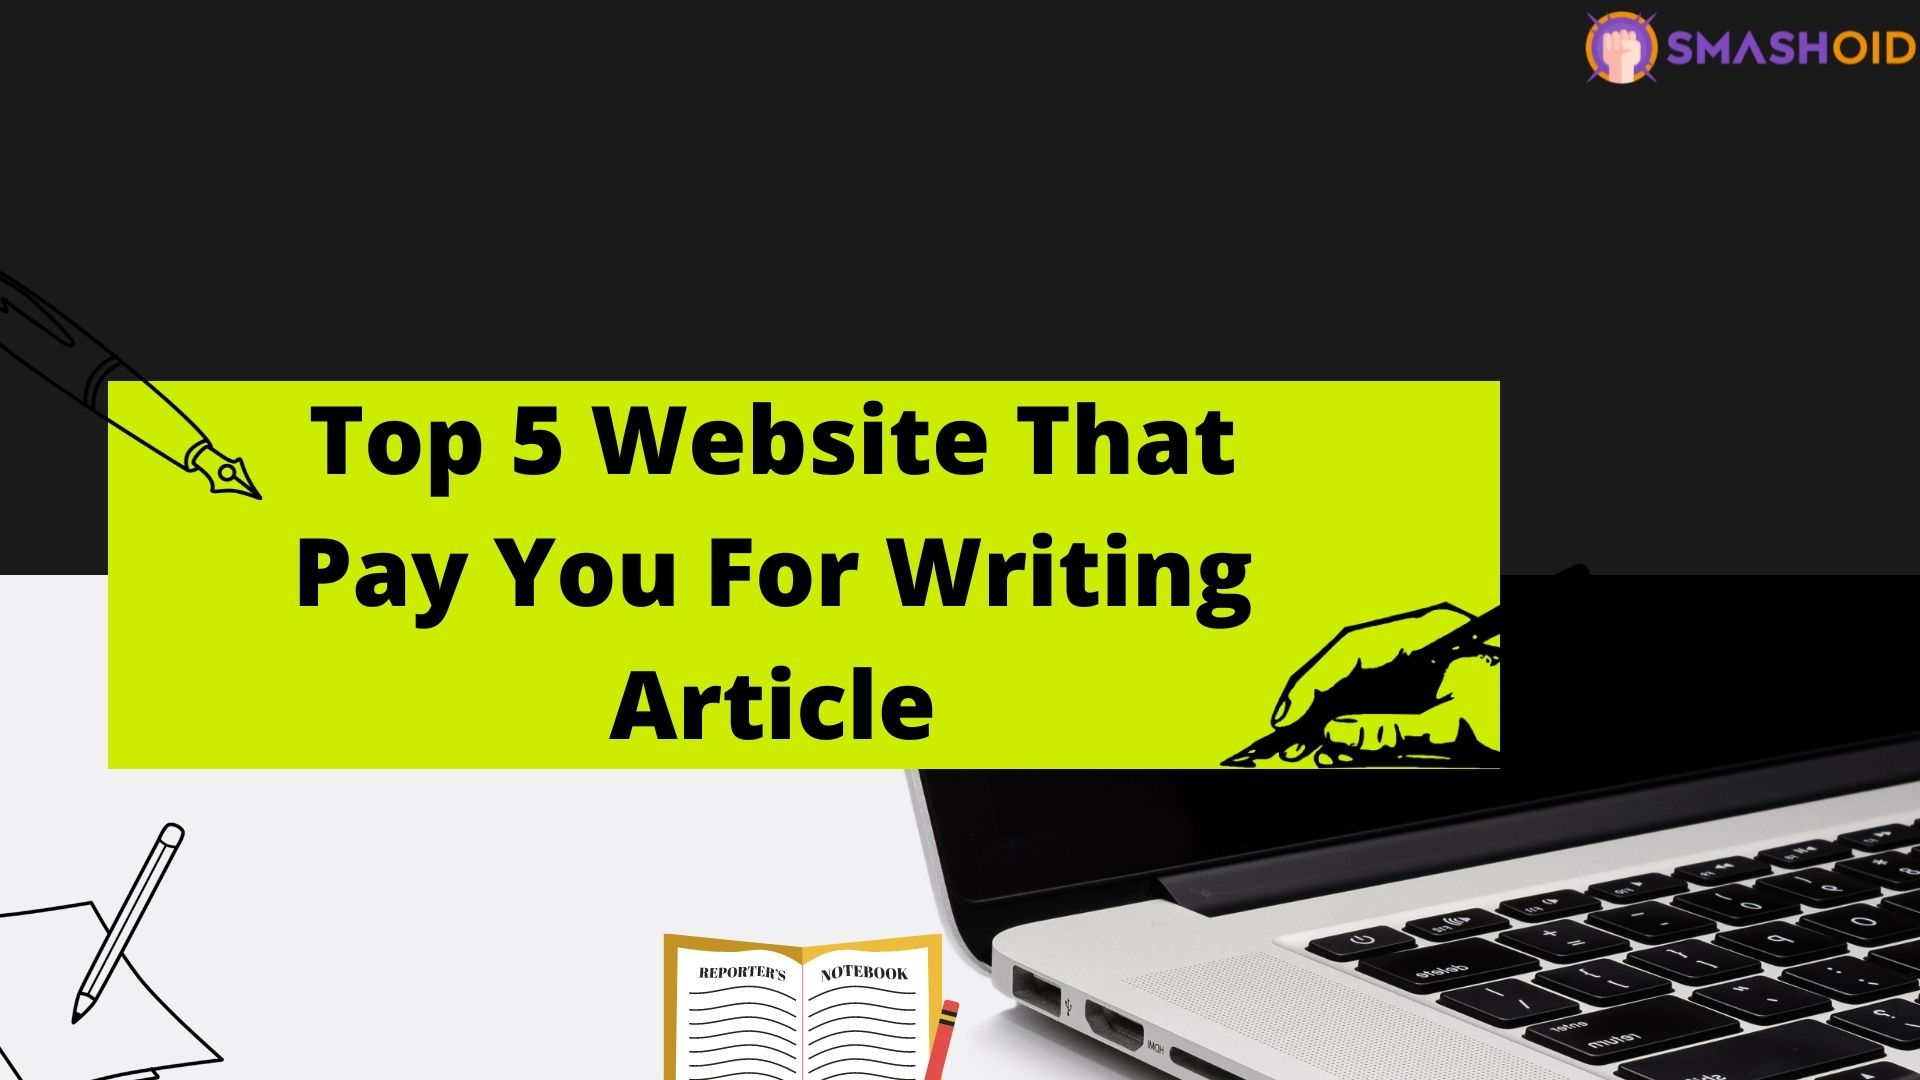 Top 5 Websites That Pay You for Writing Articles